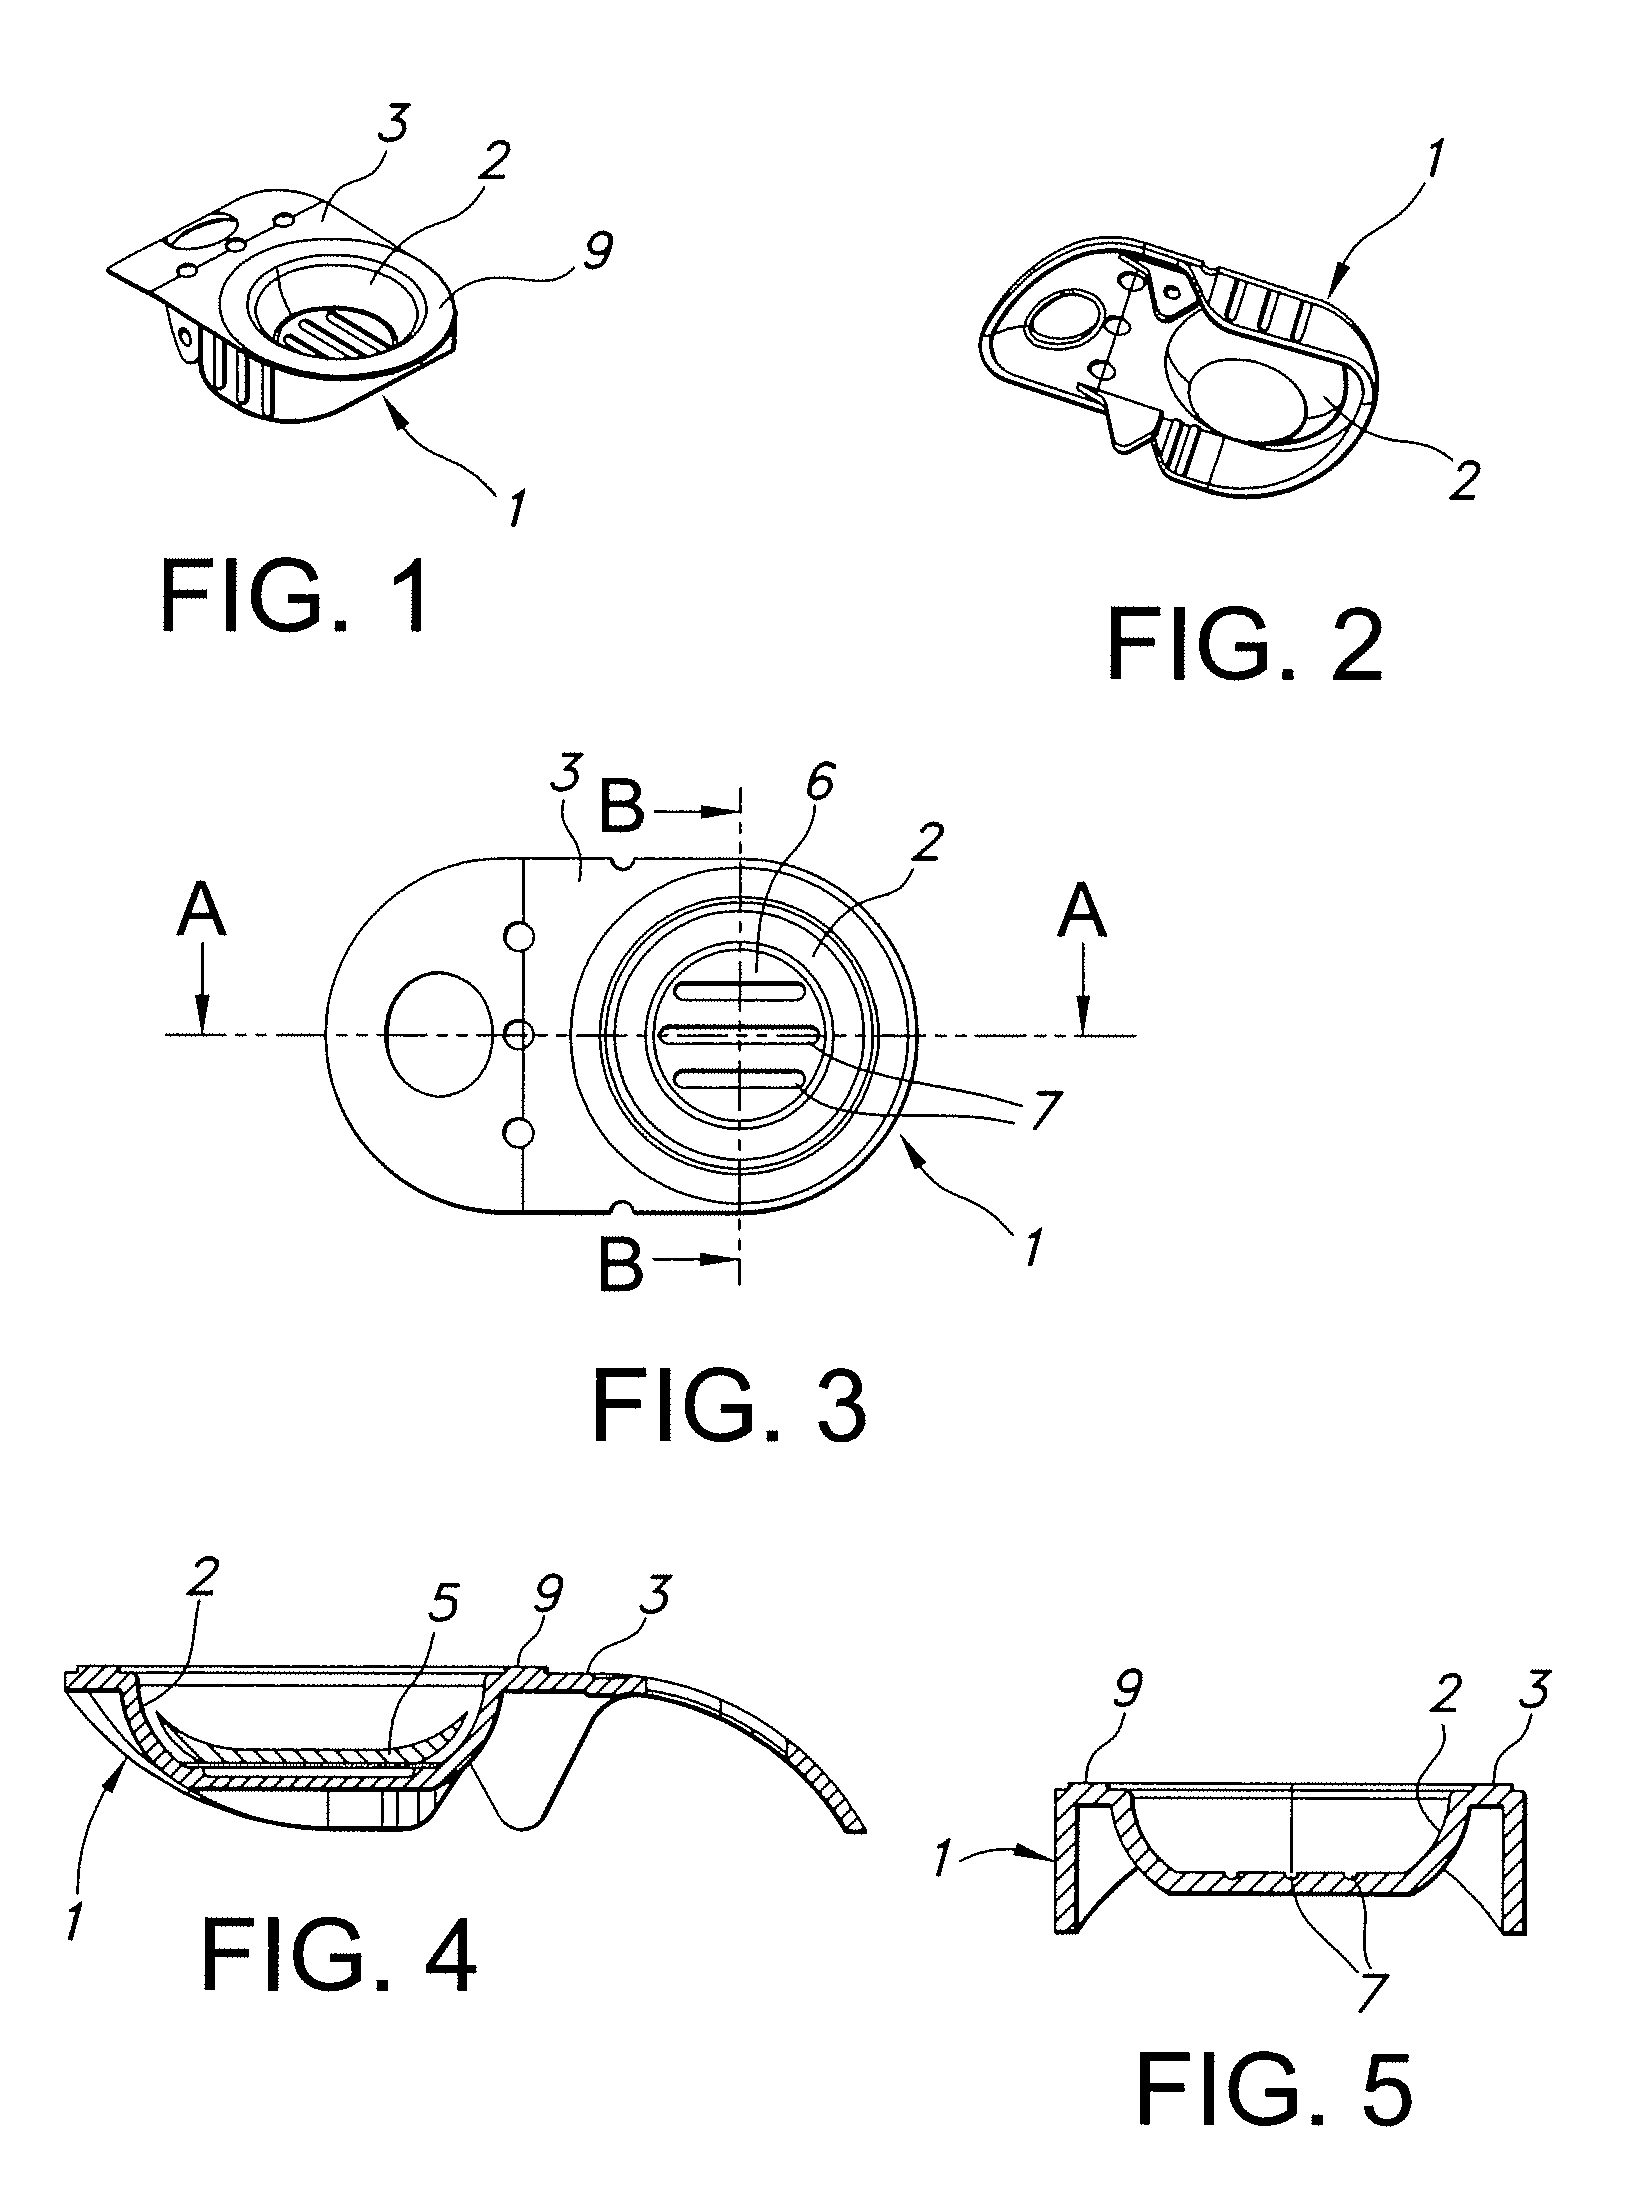 Method for treating ophthalmic lenses